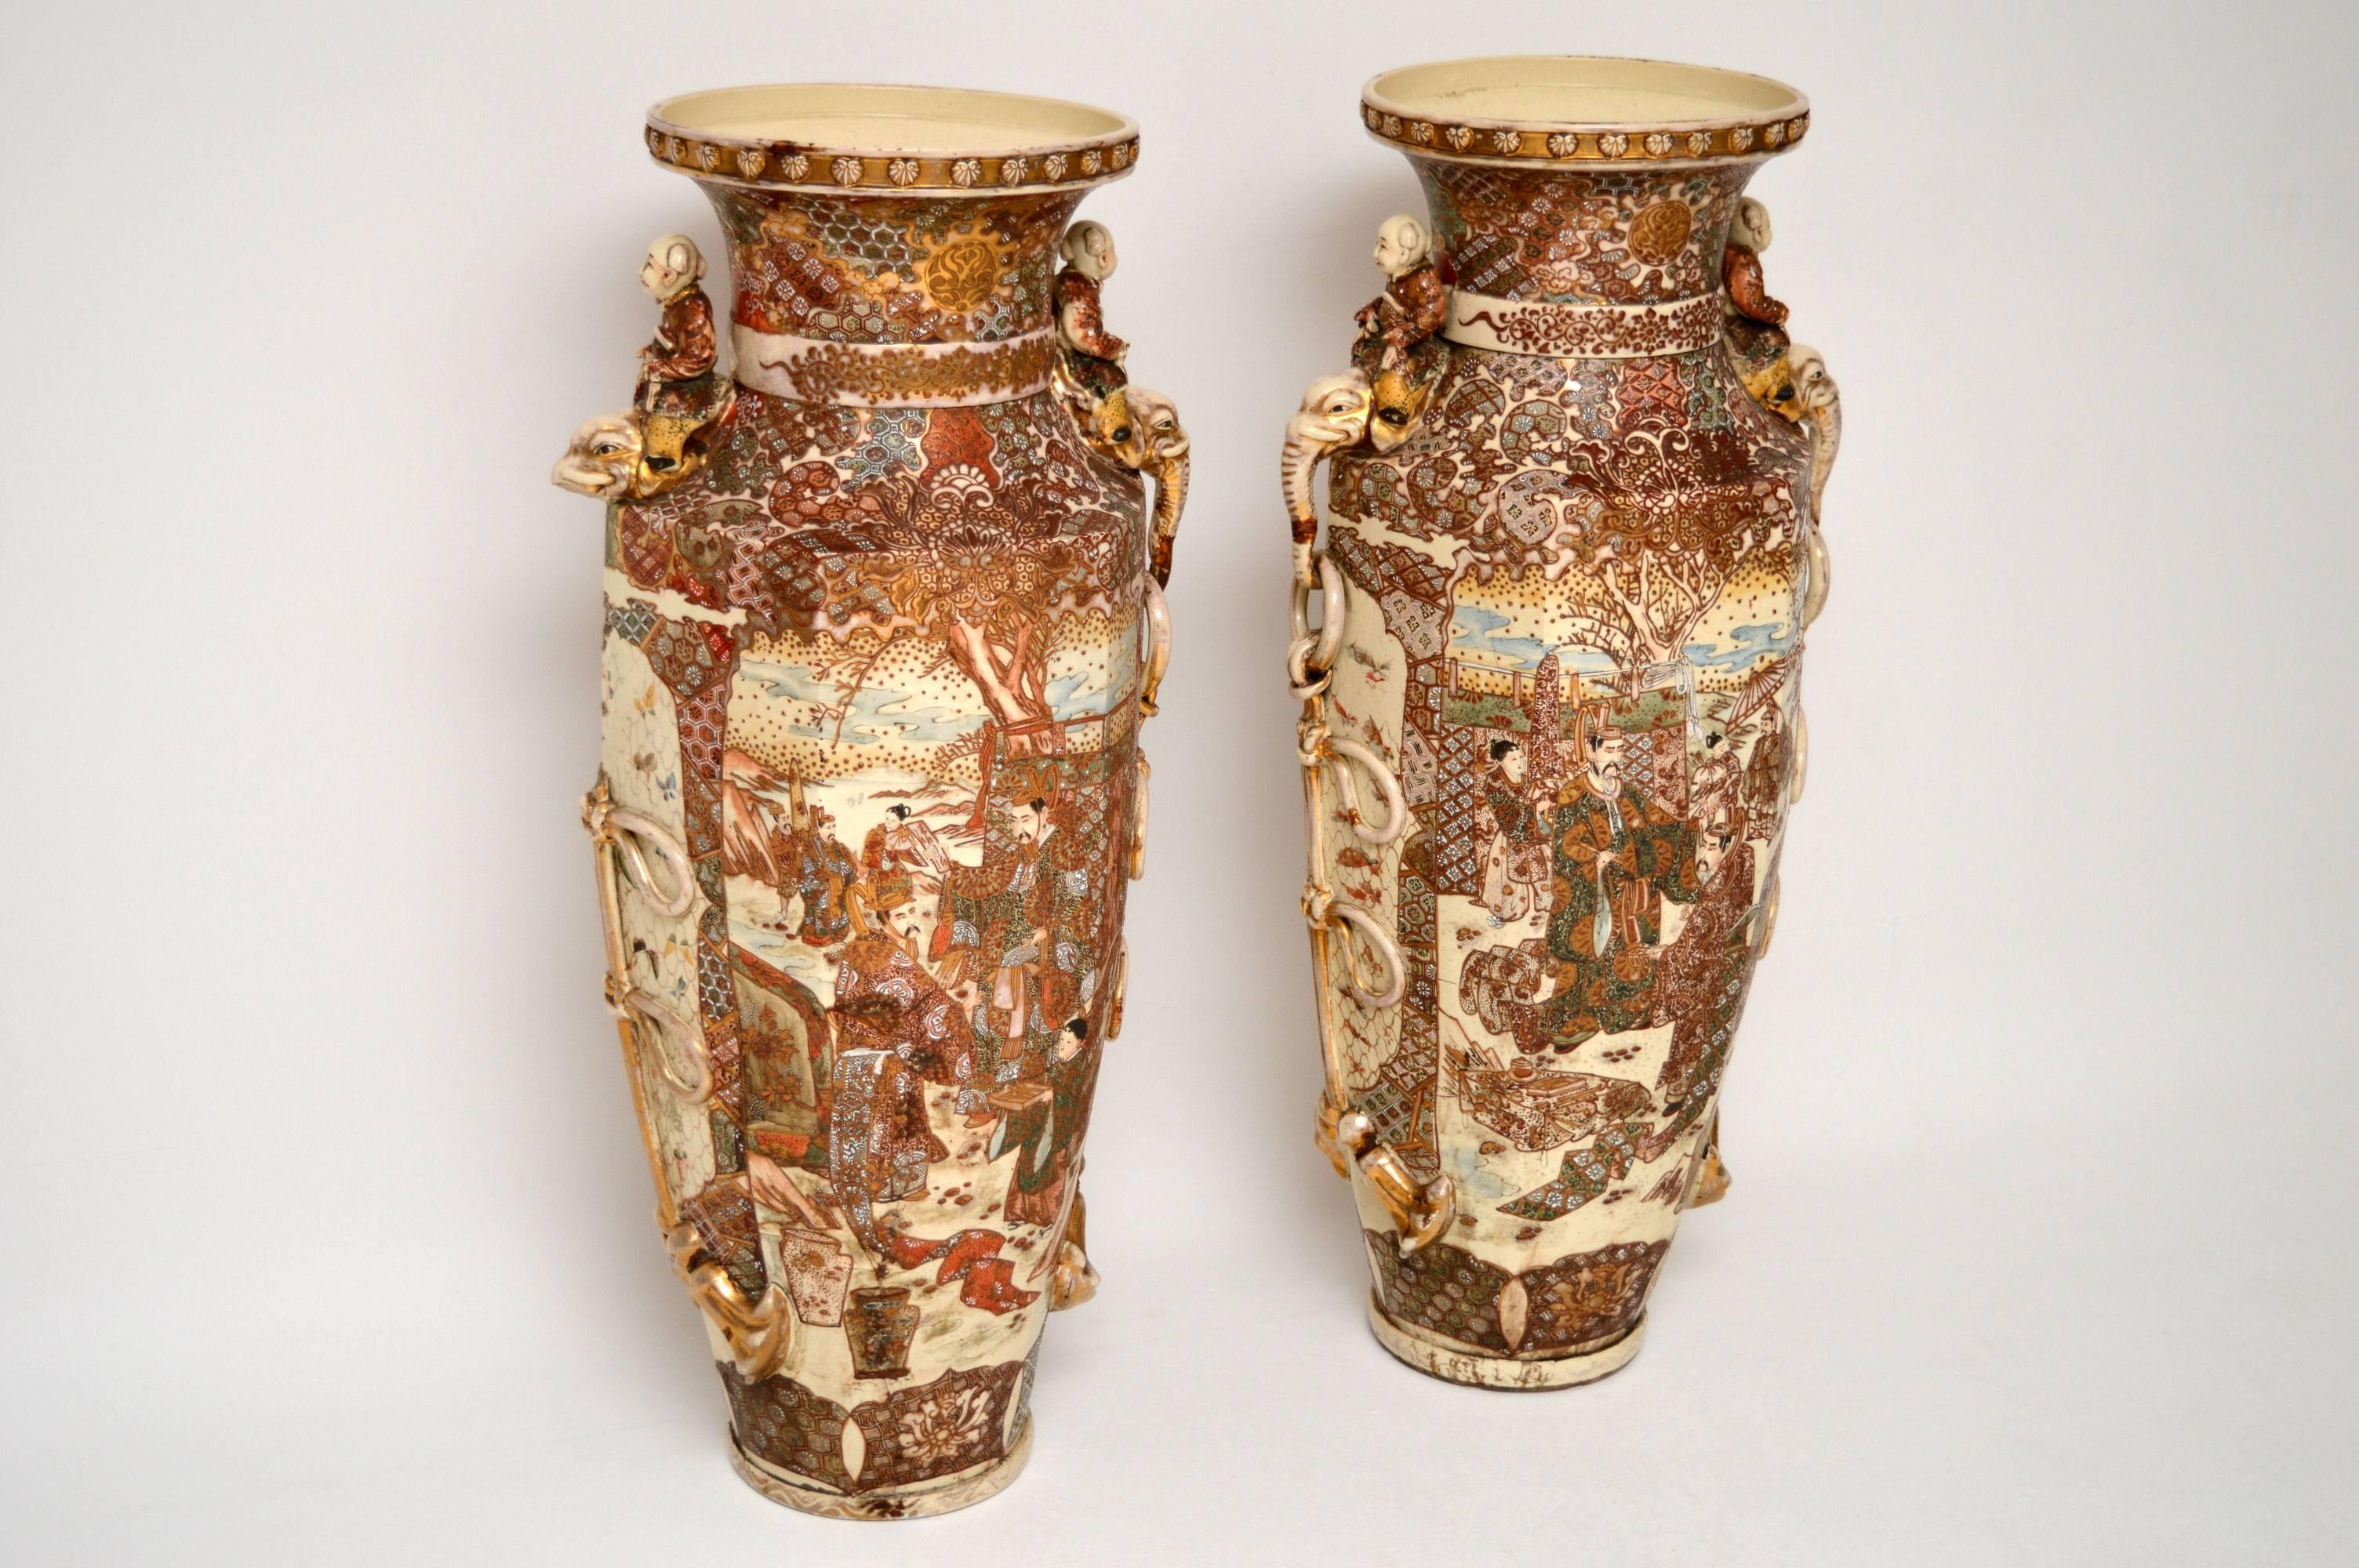 Very large pair of antique Japanese Satsuma vases, which I believe date from around the 1910 period. They may even be a bit older. I've never had a pair of vases anywhere near this large. There is a bit of damage to some of the outer mouldings and I